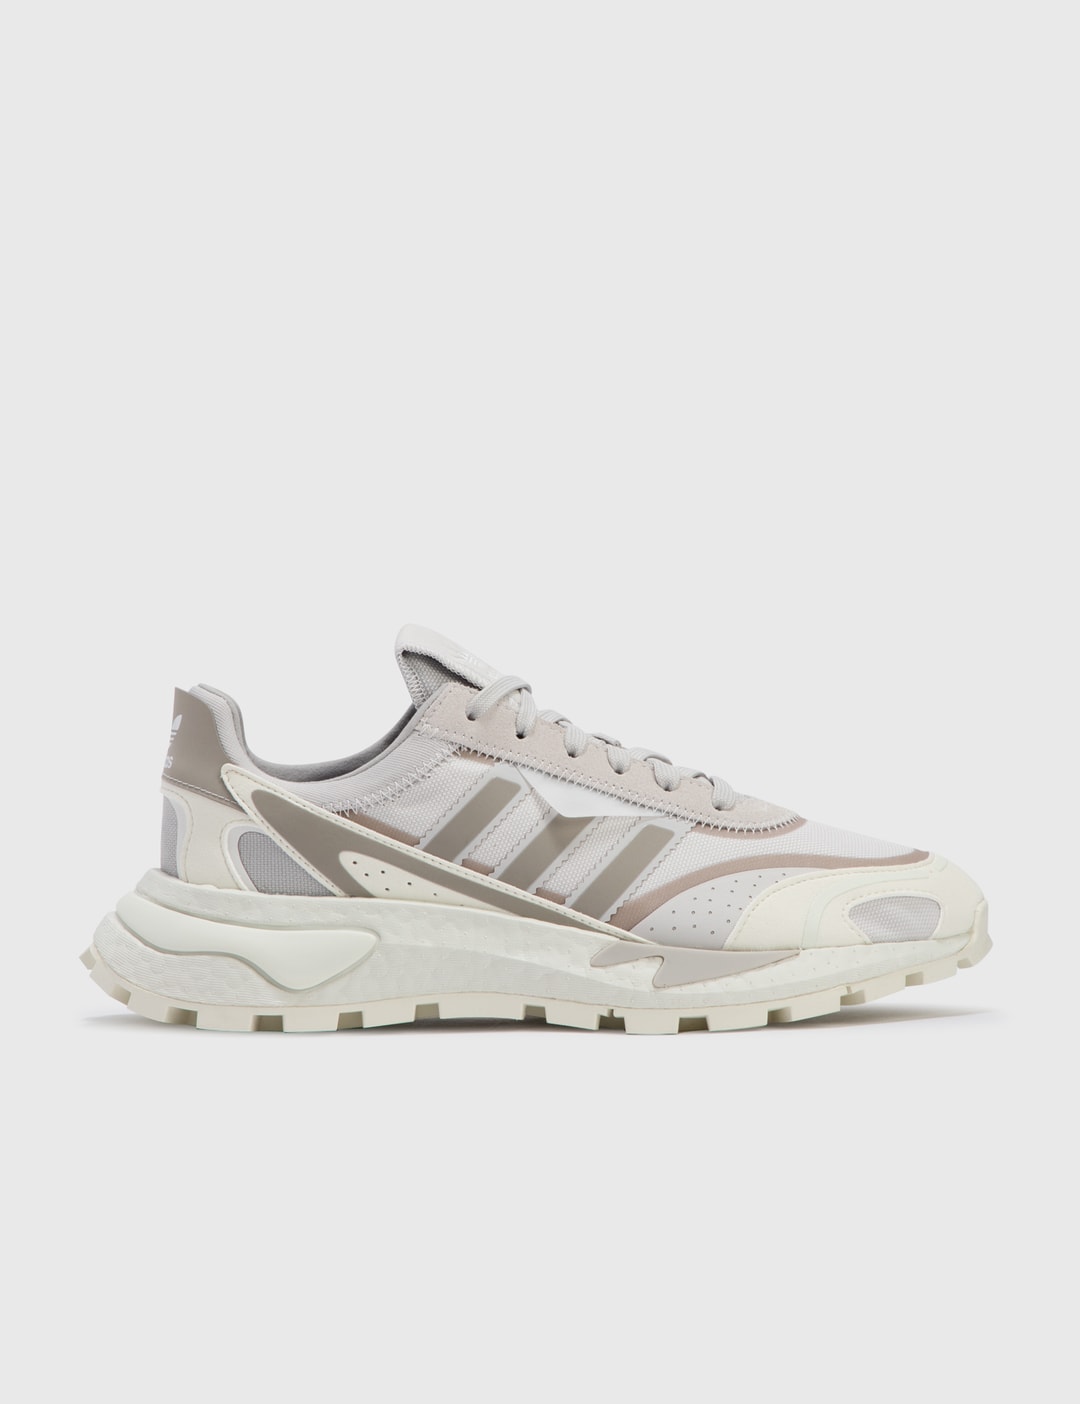 præambel Supplement konkurrenter Adidas Originals - RETROPY P9 | HBX - Globally Curated Fashion and  Lifestyle by Hypebeast